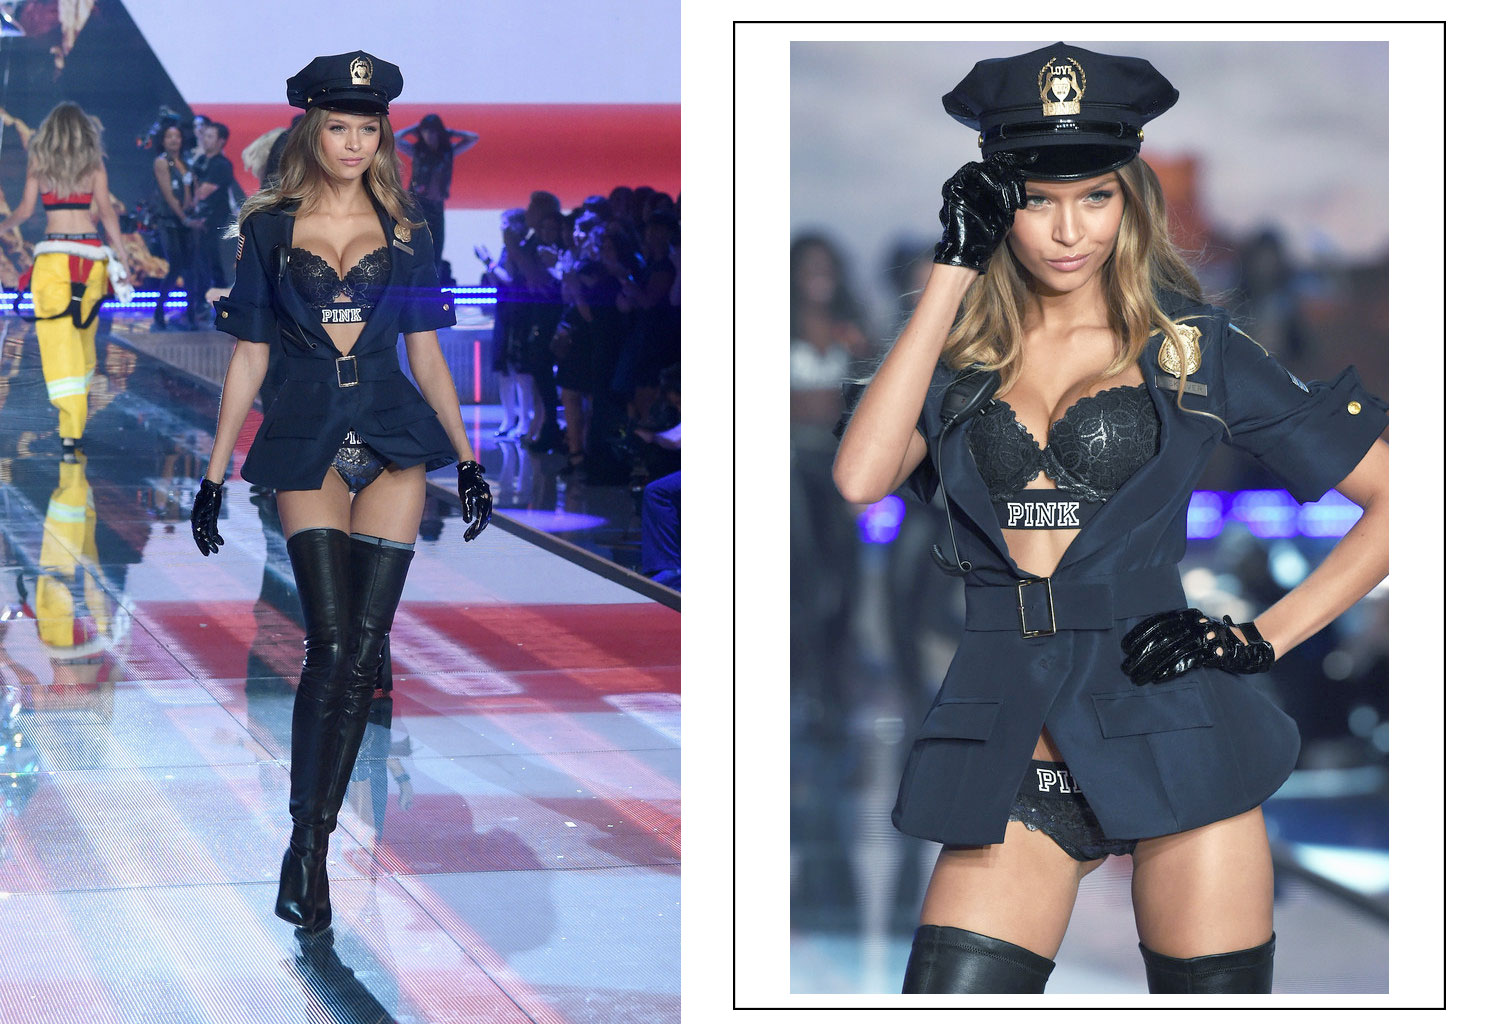 Victoria’s Secret 2015 Fashion Show: The Images, The Rumors, The Controversy